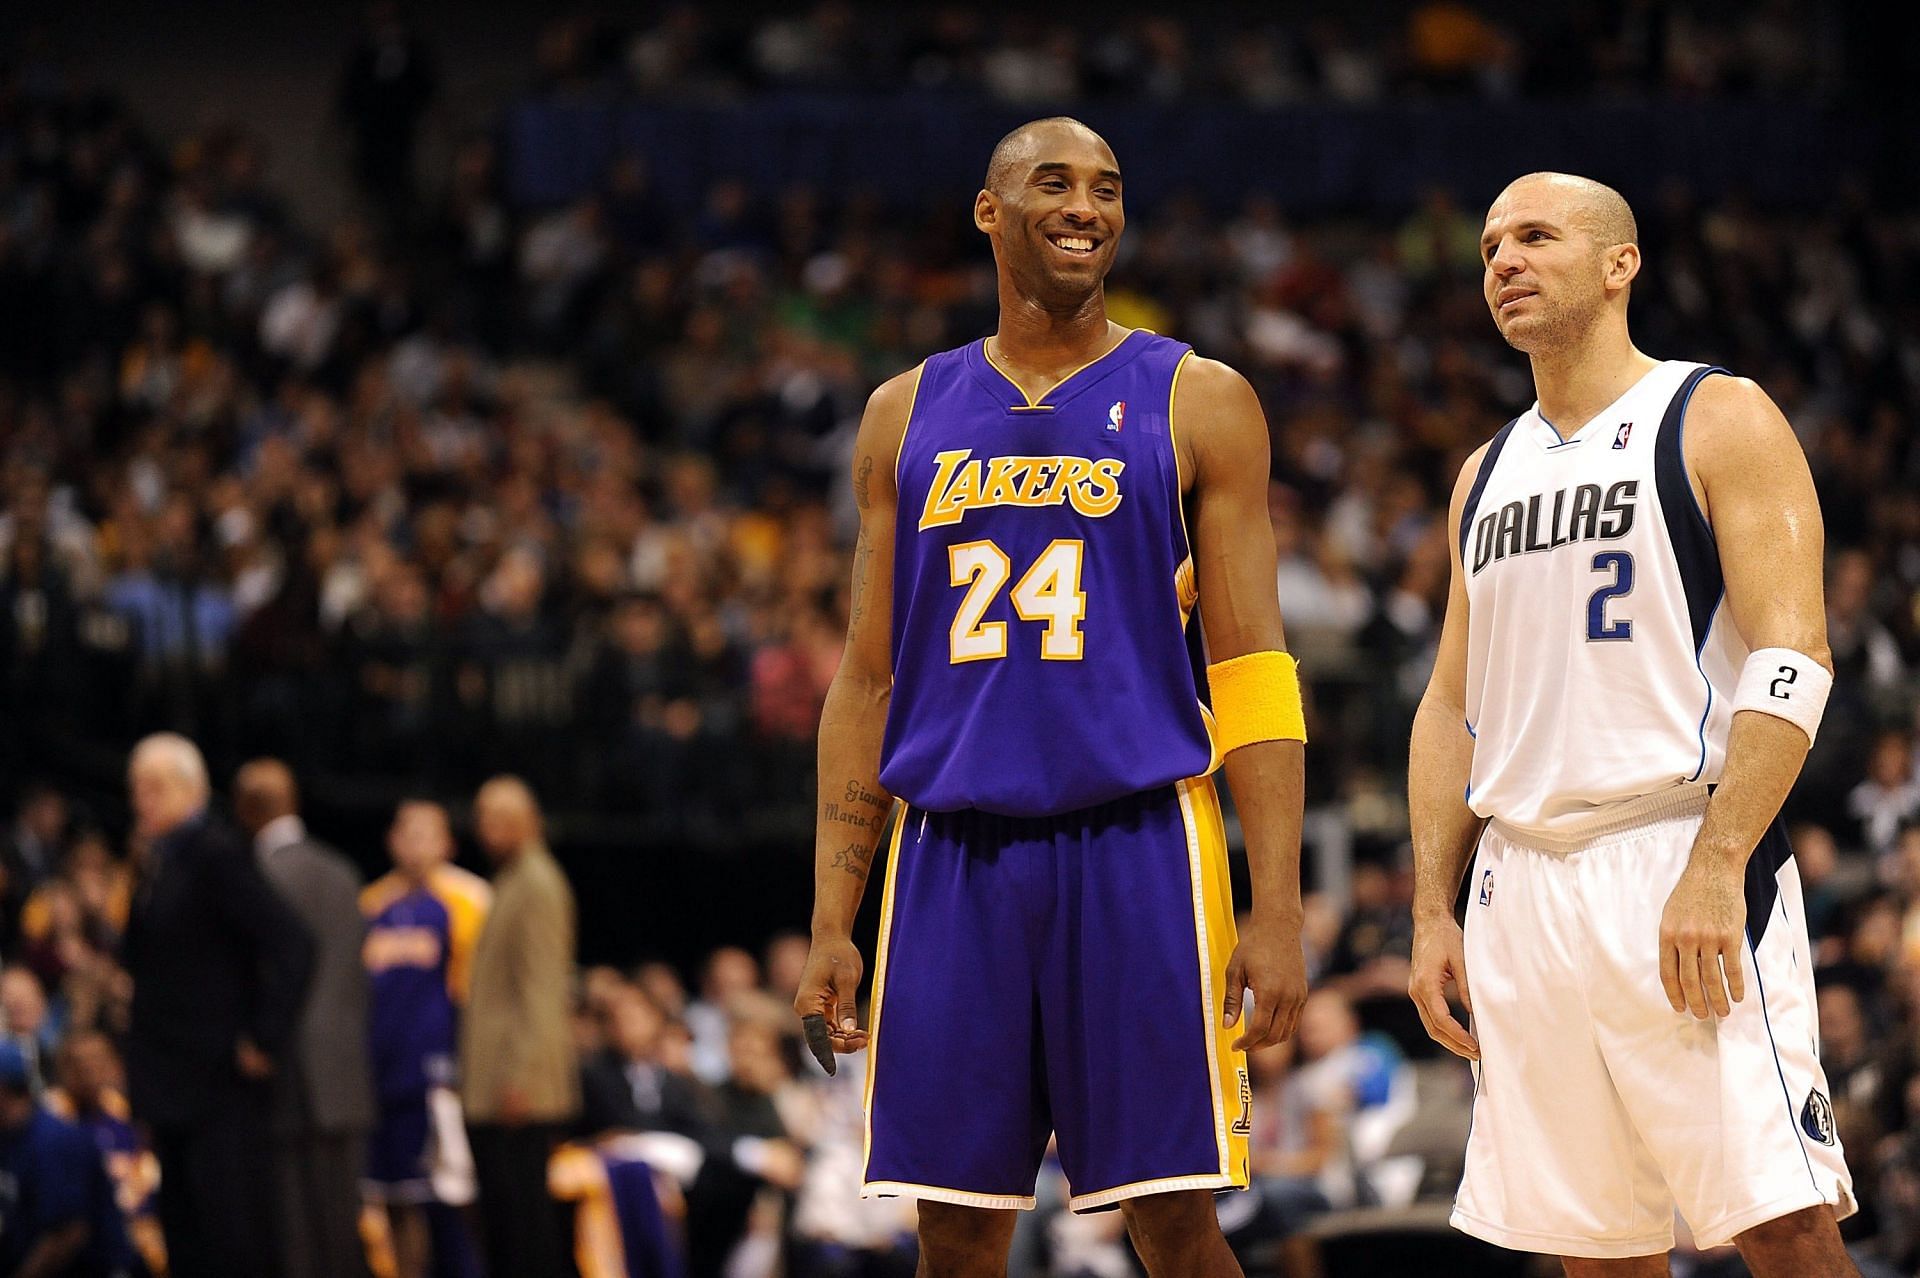 Kobe Bryant and Jason Kidd are among NBA players who were arrested for criminal offenses (Image via Getty Images)